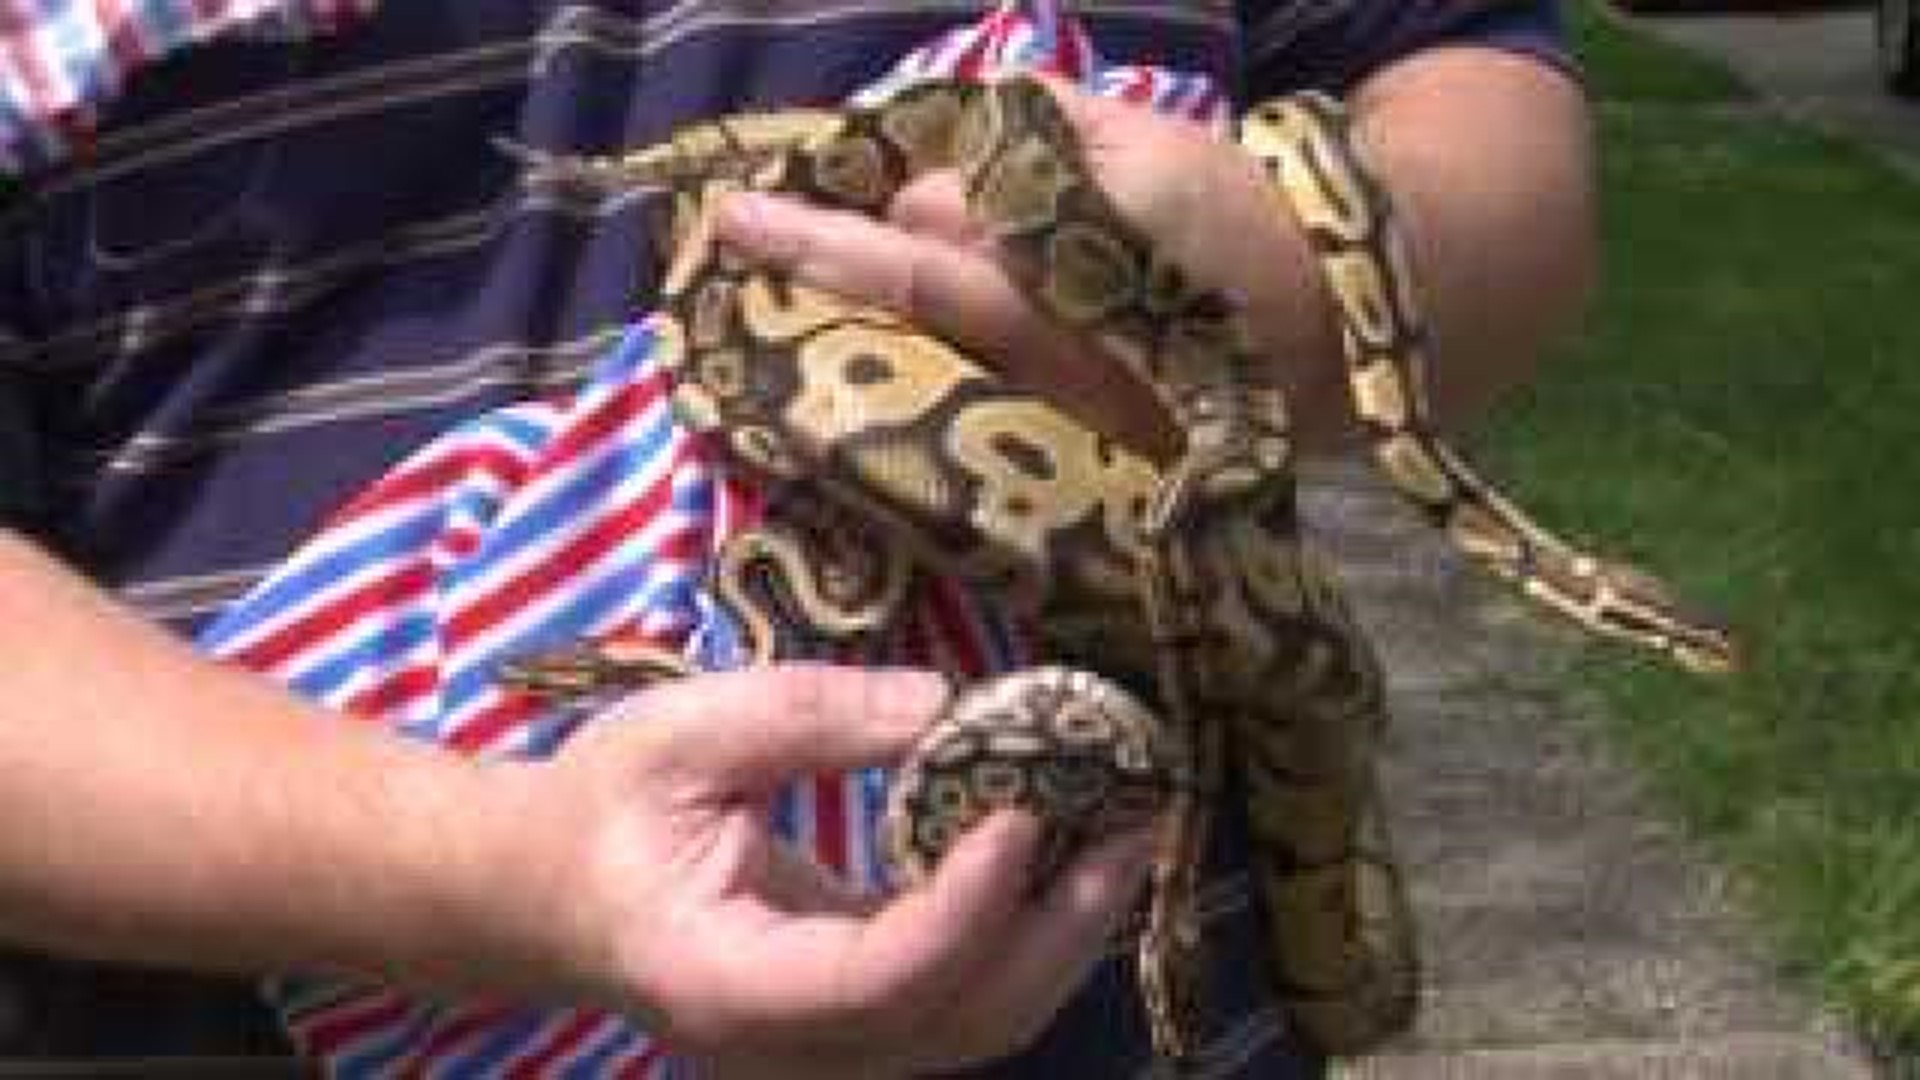 25 Ball pythons found in Moline home